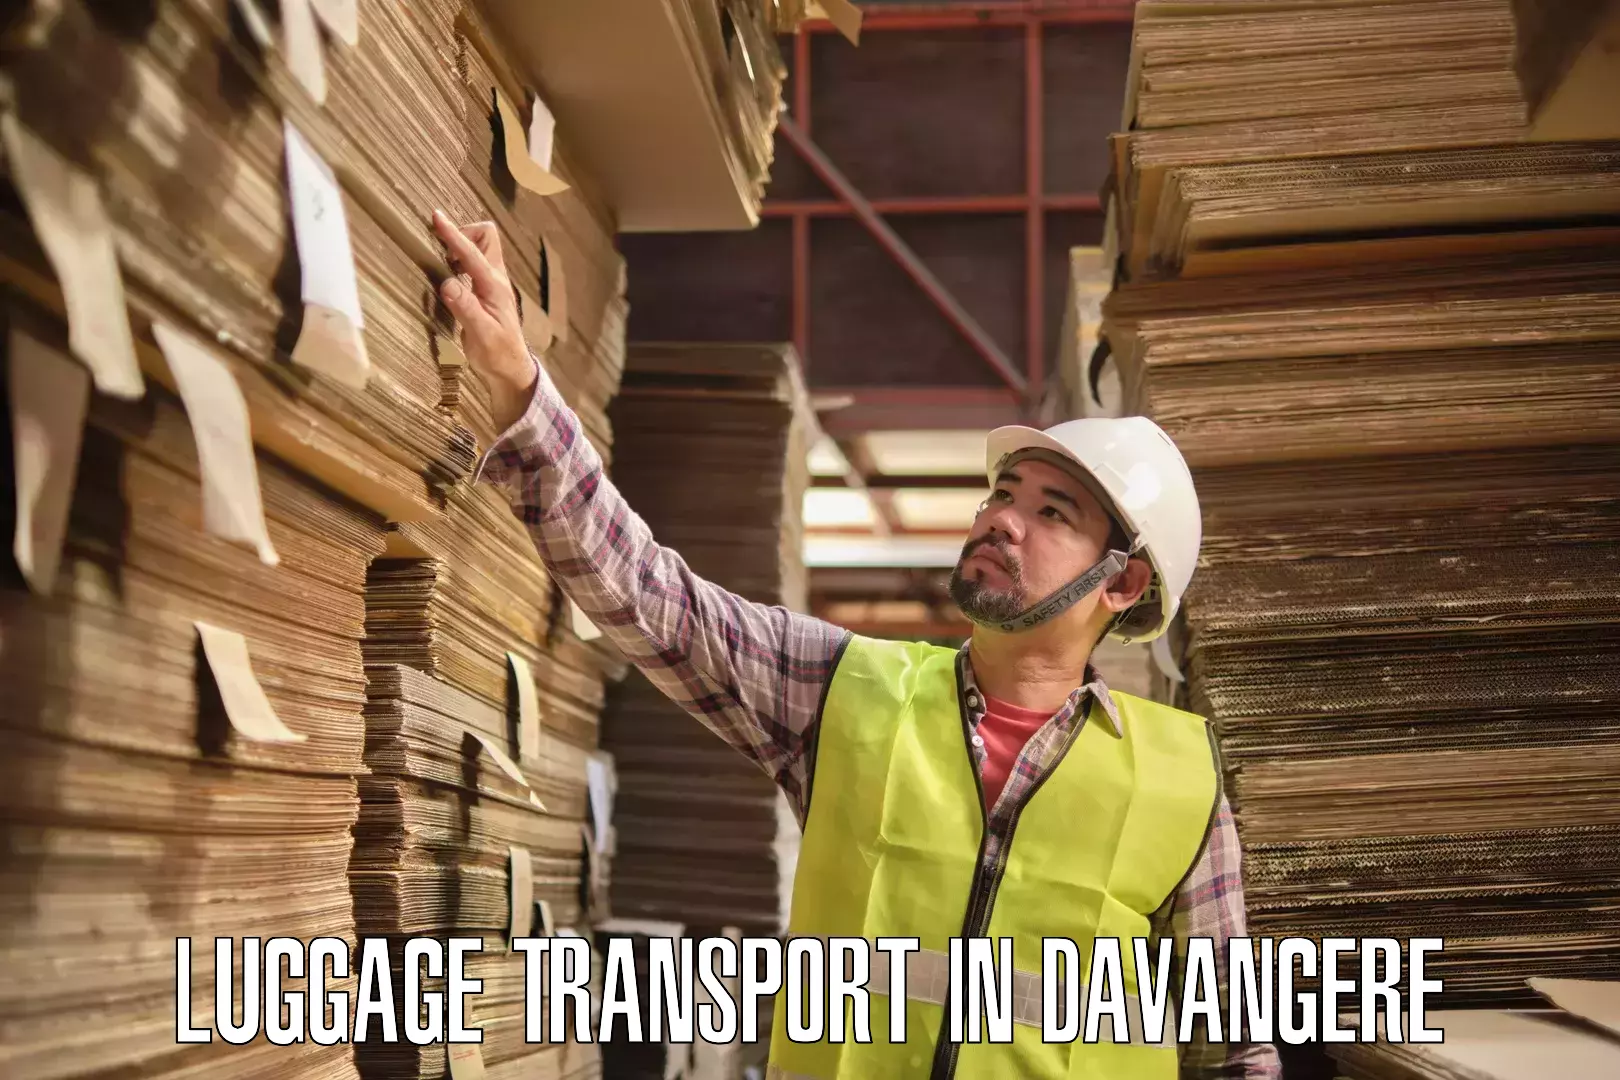 Baggage relocation service in Davangere